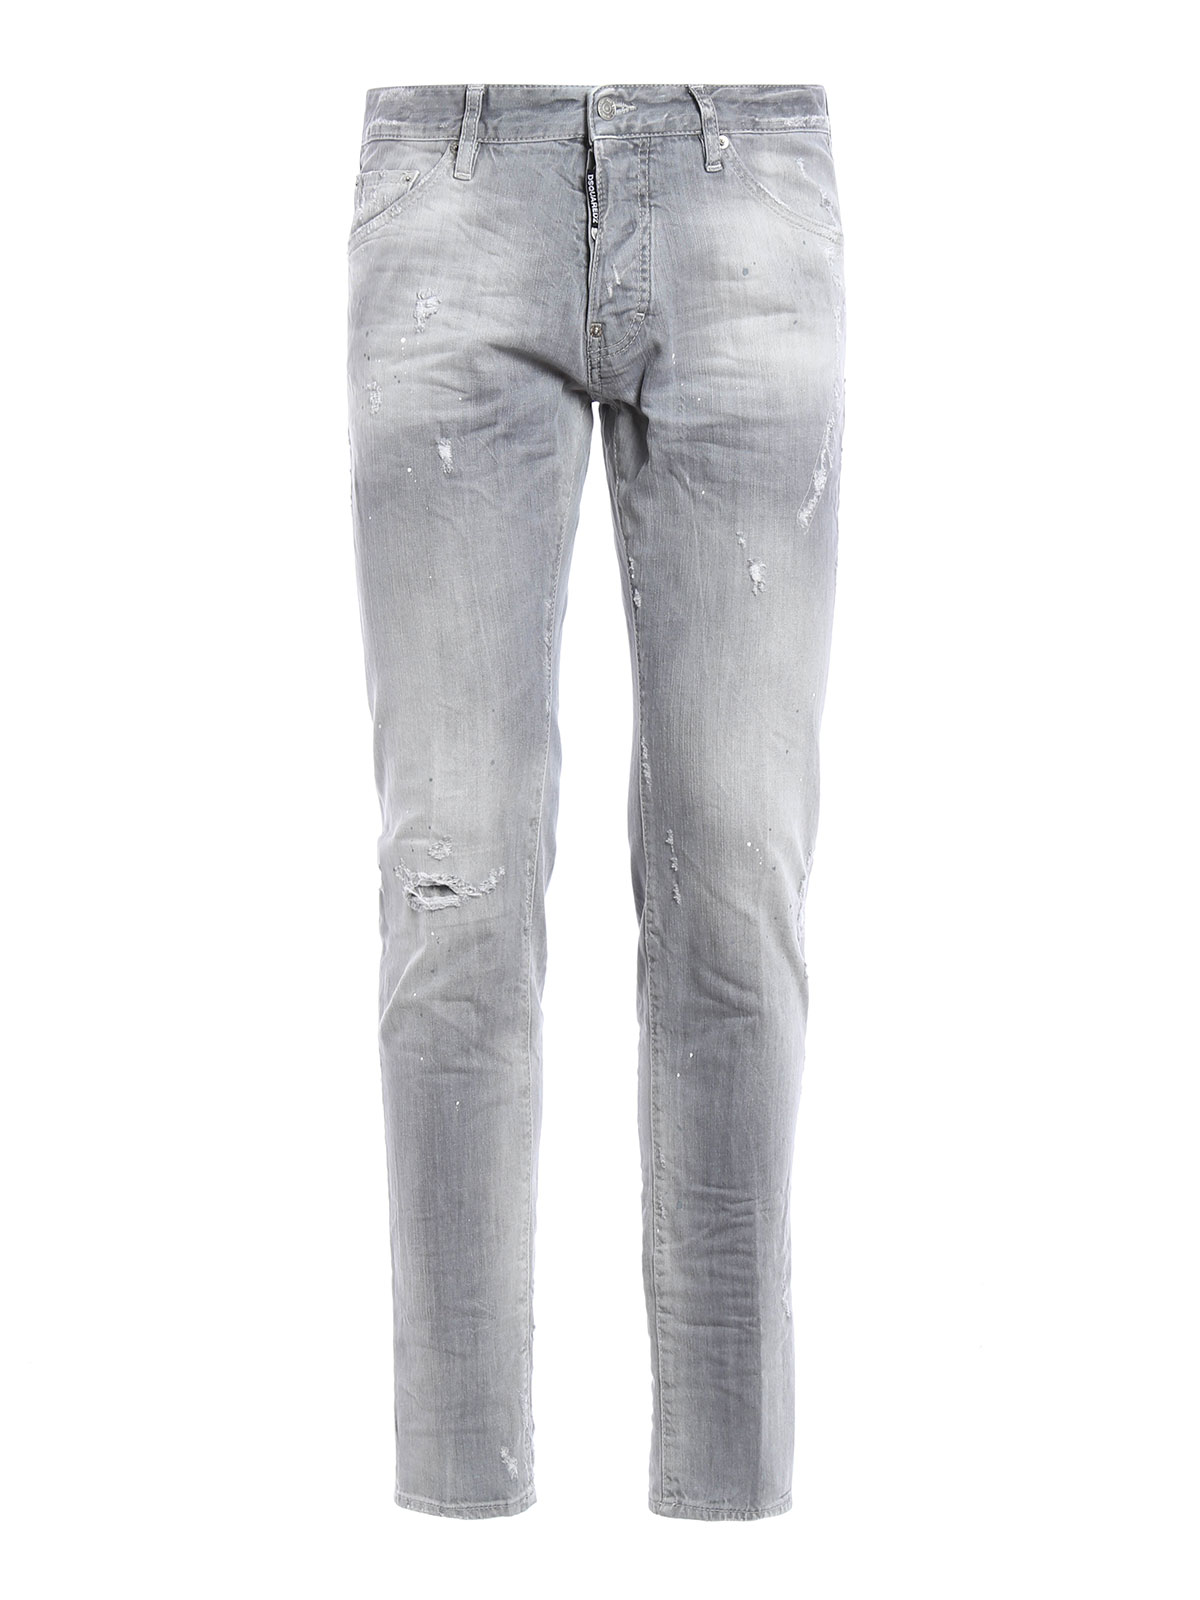 Skinny jeans Dsquared2 - Cool Guy ripped jeans - S71LB0161S30260852